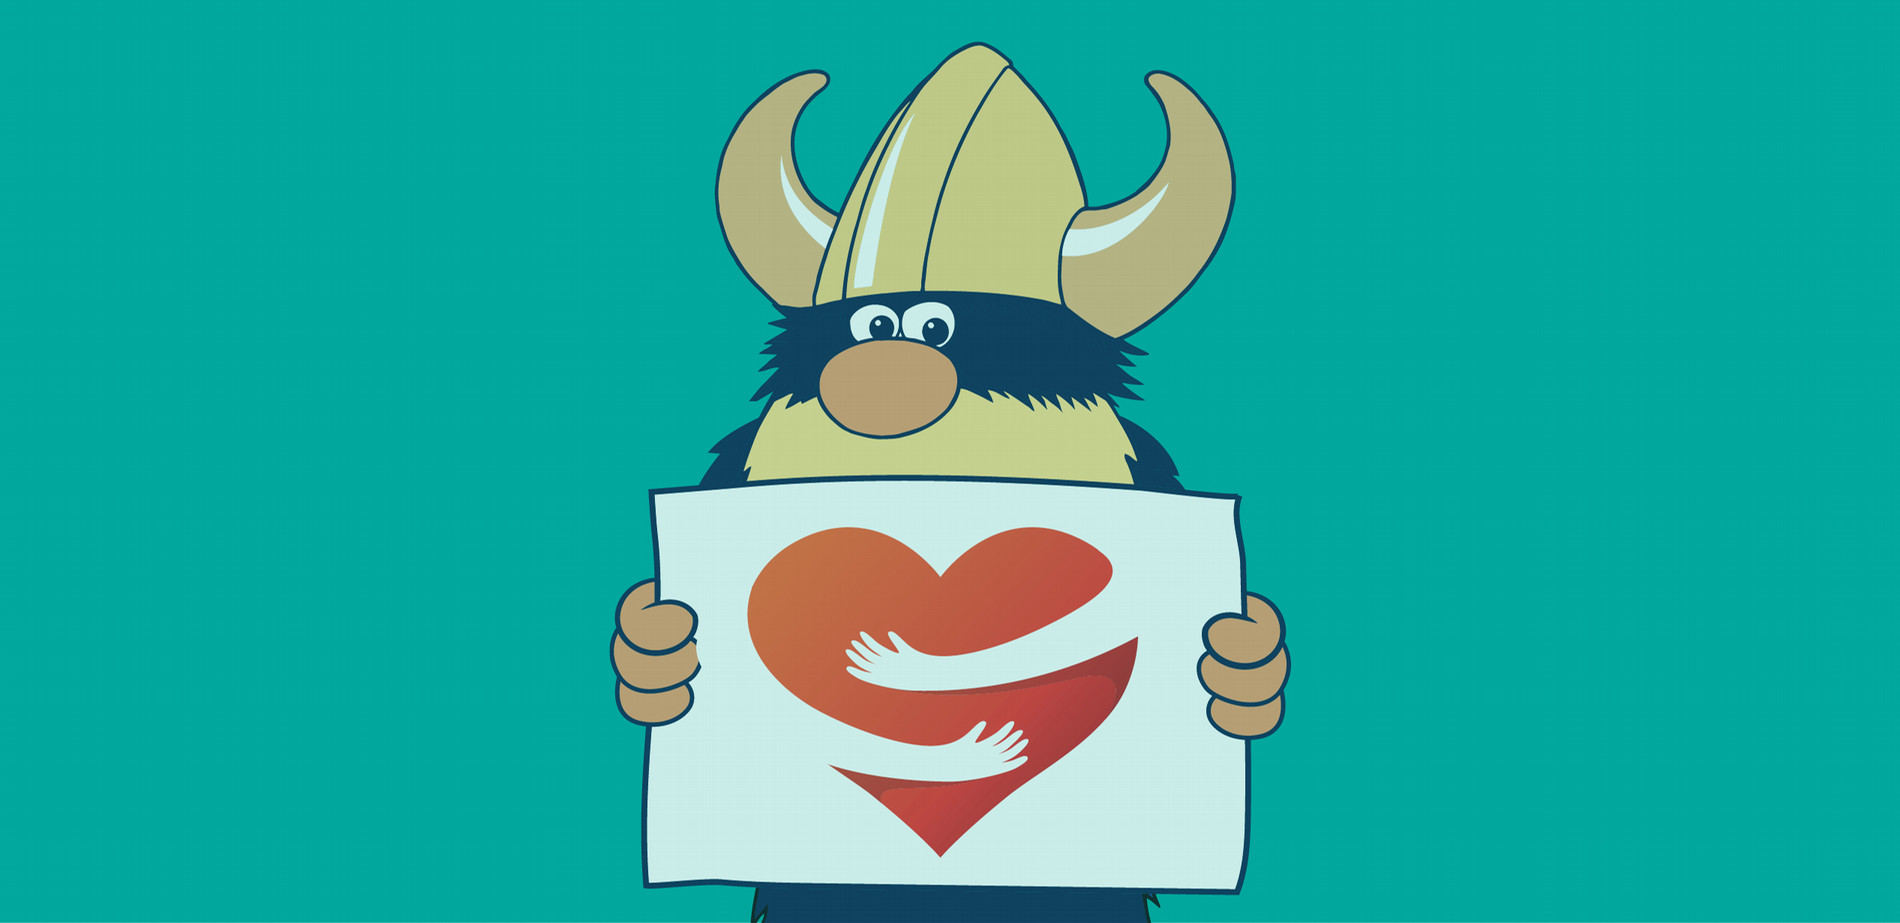 Valdar the Viking holding sign with heart emblem